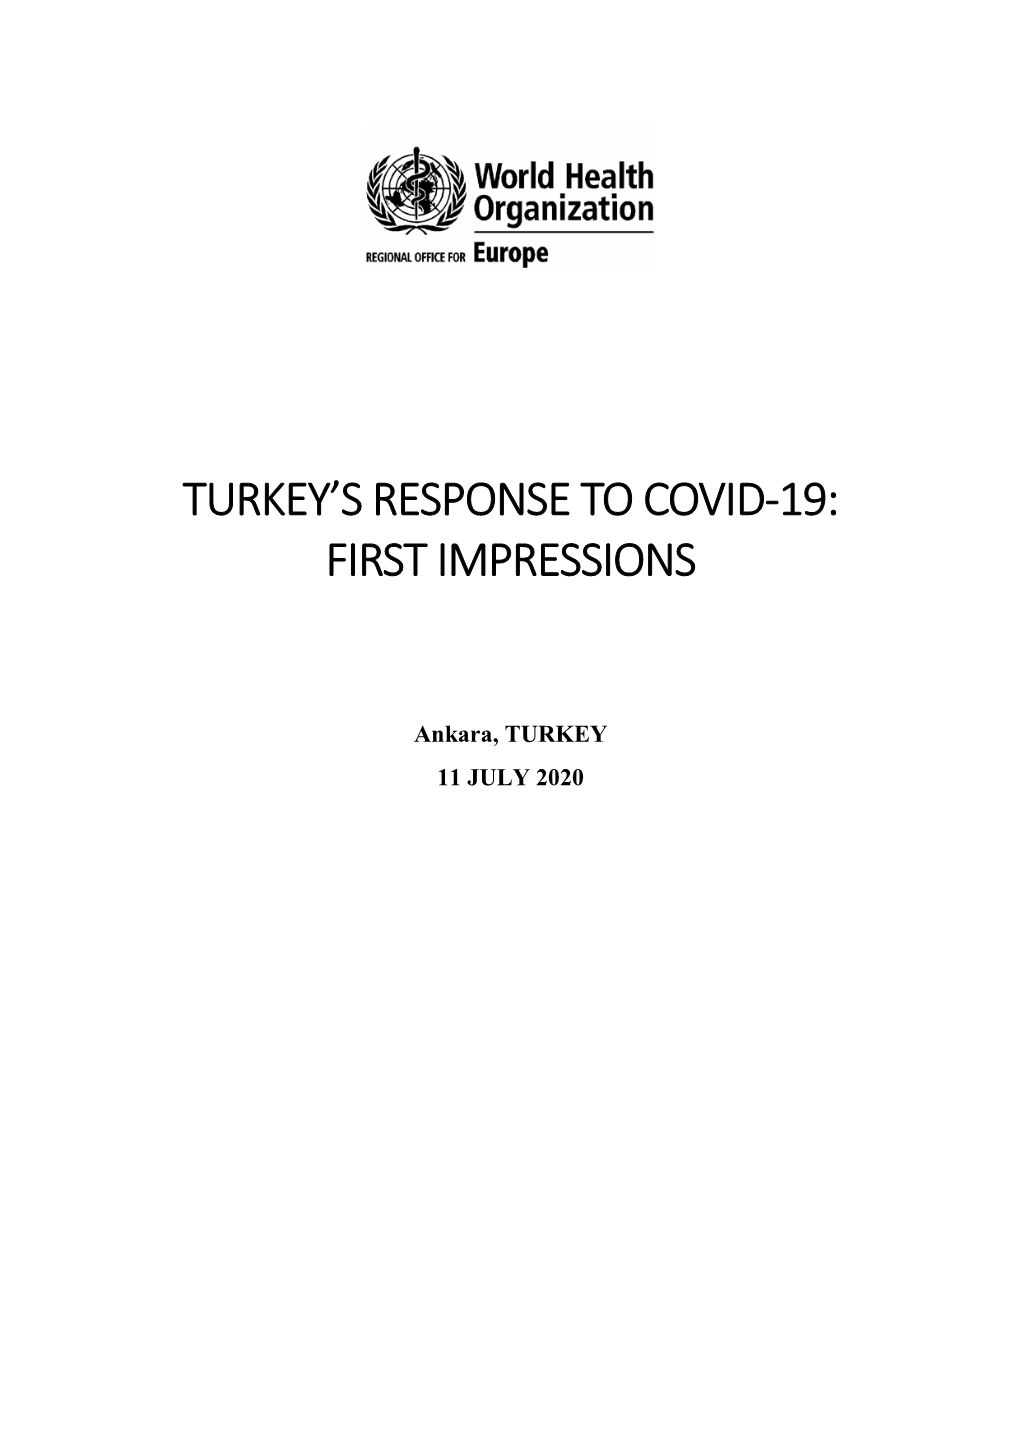 Turkey's Response to Covid-19: First Impressions